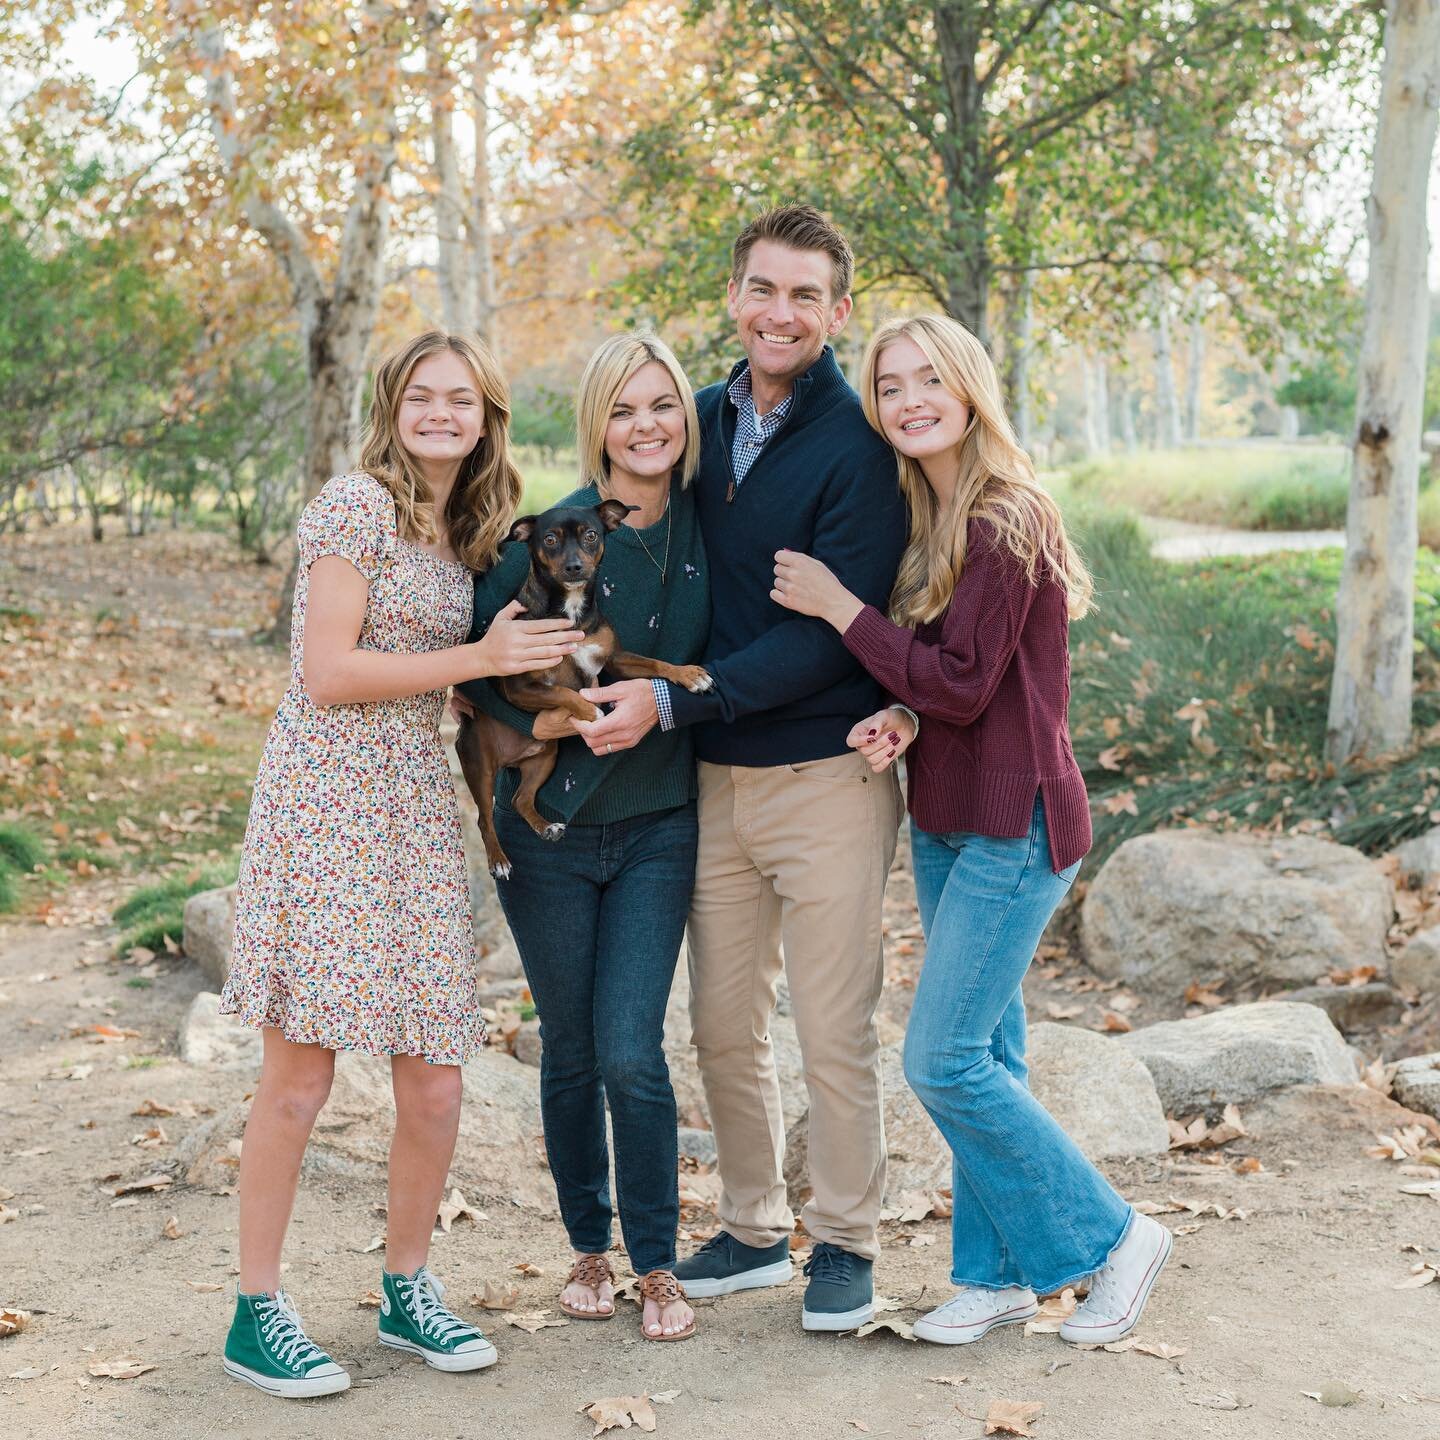 &ldquo;The perfect family photo doesn&rsquo;t exi&hellip;&rdquo; 🤭😍🥰

So many versions of perfect we&rsquo;ve created with all of you through the years !! ❤️❤️❤️ 

#orangecountyphotography #orangecountyphotographer #orangecountyfamilyphotographer 